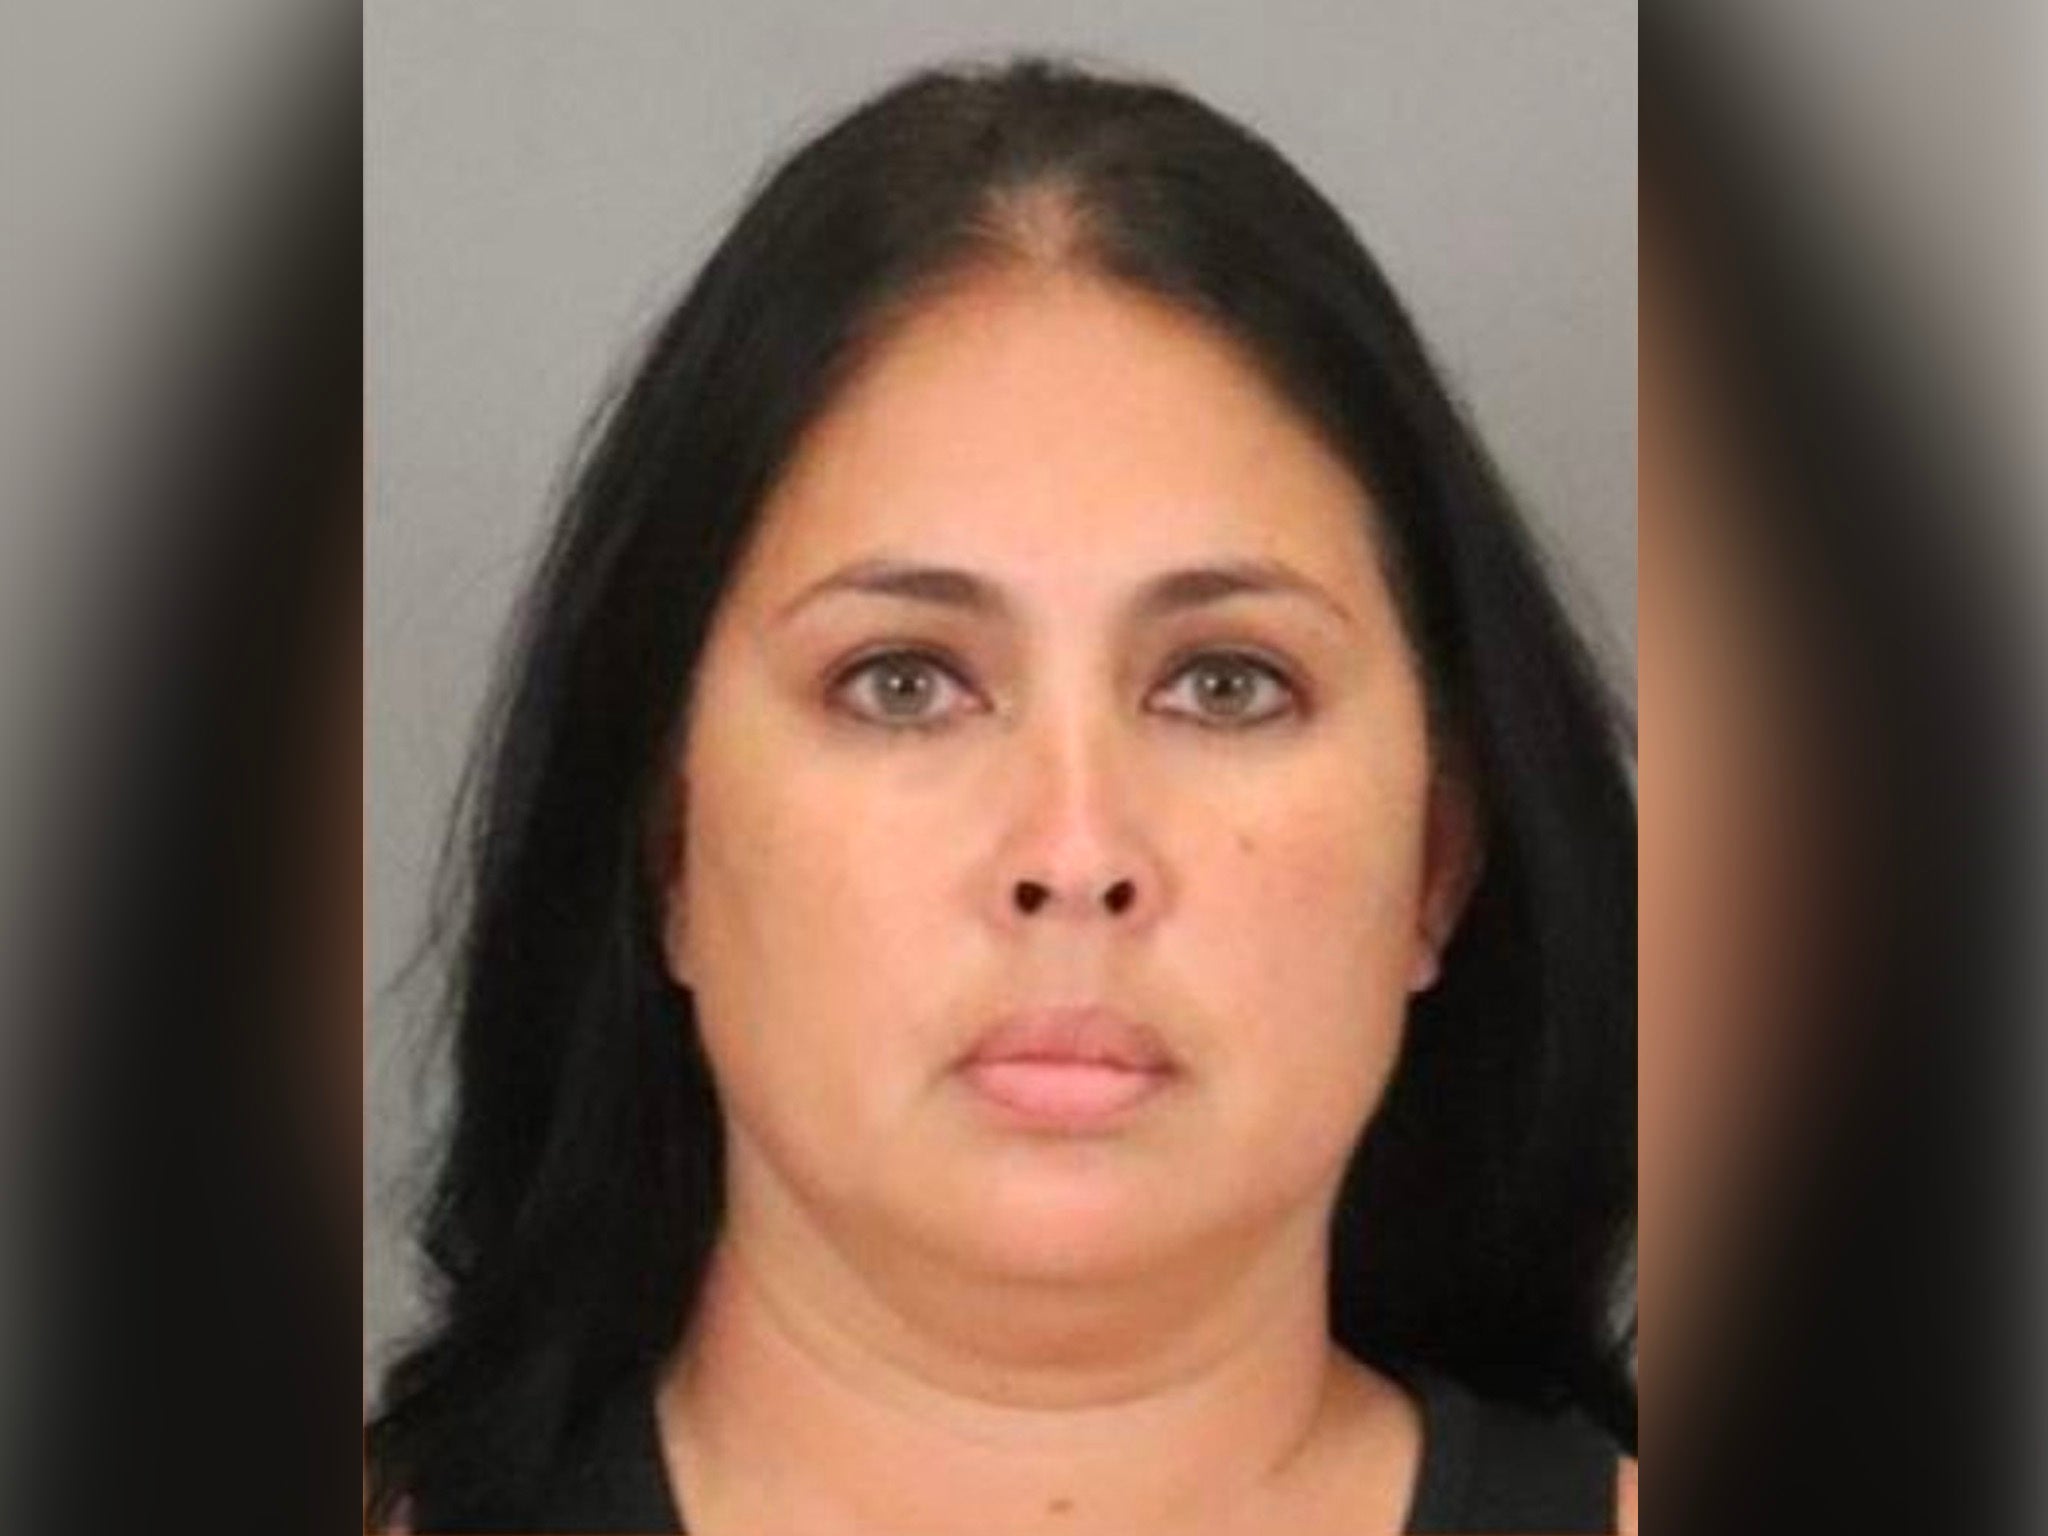 Tara Brazzle has been arrested years after the discovery of an abandoned baby.